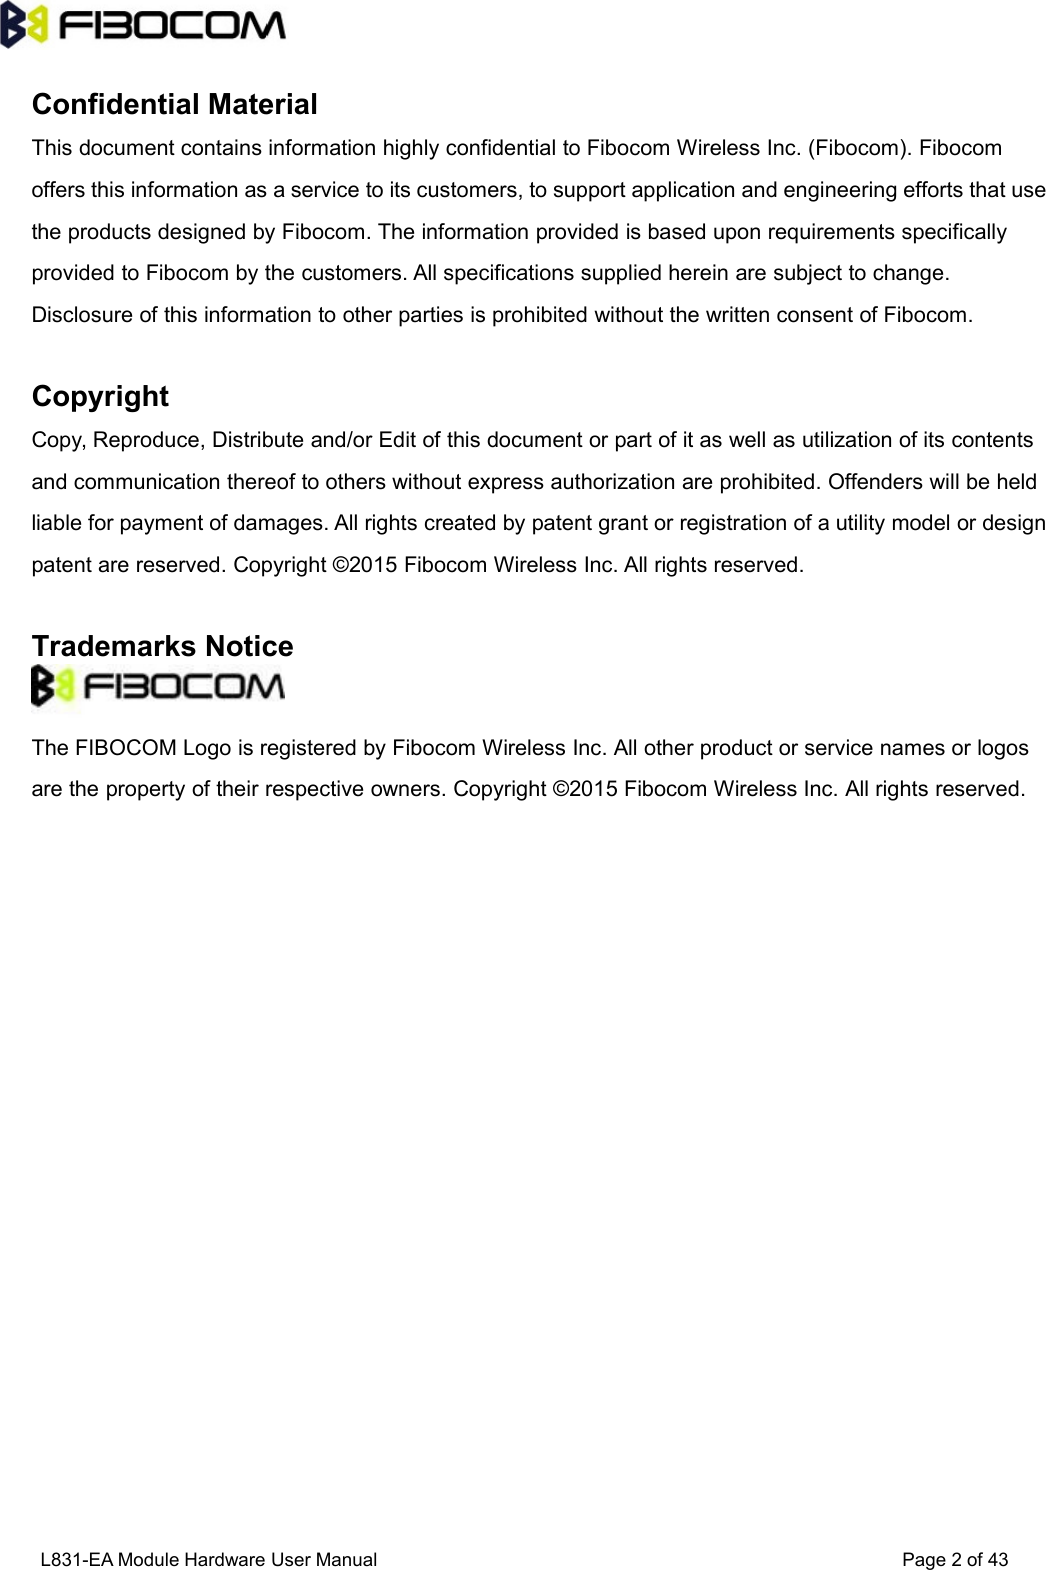 L831-EA Module Hardware User Manual Page2of43Confidential MaterialThis document contains information highly confidential to Fibocom Wireless Inc. (Fibocom). Fibocomoffers this information as a service to its customers, to support application and engineering efforts that usethe products designed by Fibocom. The information provided is based upon requirements specificallyprovided to Fibocom by the customers. All specifications supplied herein are subject to change.Disclosure of this information to other parties is prohibited without the written consent of Fibocom.CopyrightCopy, Reproduce, Distribute and/or Edit of this document or part of it as well as utilization of its contentsand communication thereof to others without express authorization are prohibited. Offenders will be heldliable for payment of damages. All rights created by patent grant or registration of a utility model or designpatent are reserved. Copyright ©2015 Fibocom Wireless Inc. All rights reserved.Trademarks NoticeThe FIBOCOM Logo is registered by Fibocom Wireless Inc. All other product or service names or logosare the property of their respective owners. Copyright ©2015 Fibocom Wireless Inc. All rights reserved.